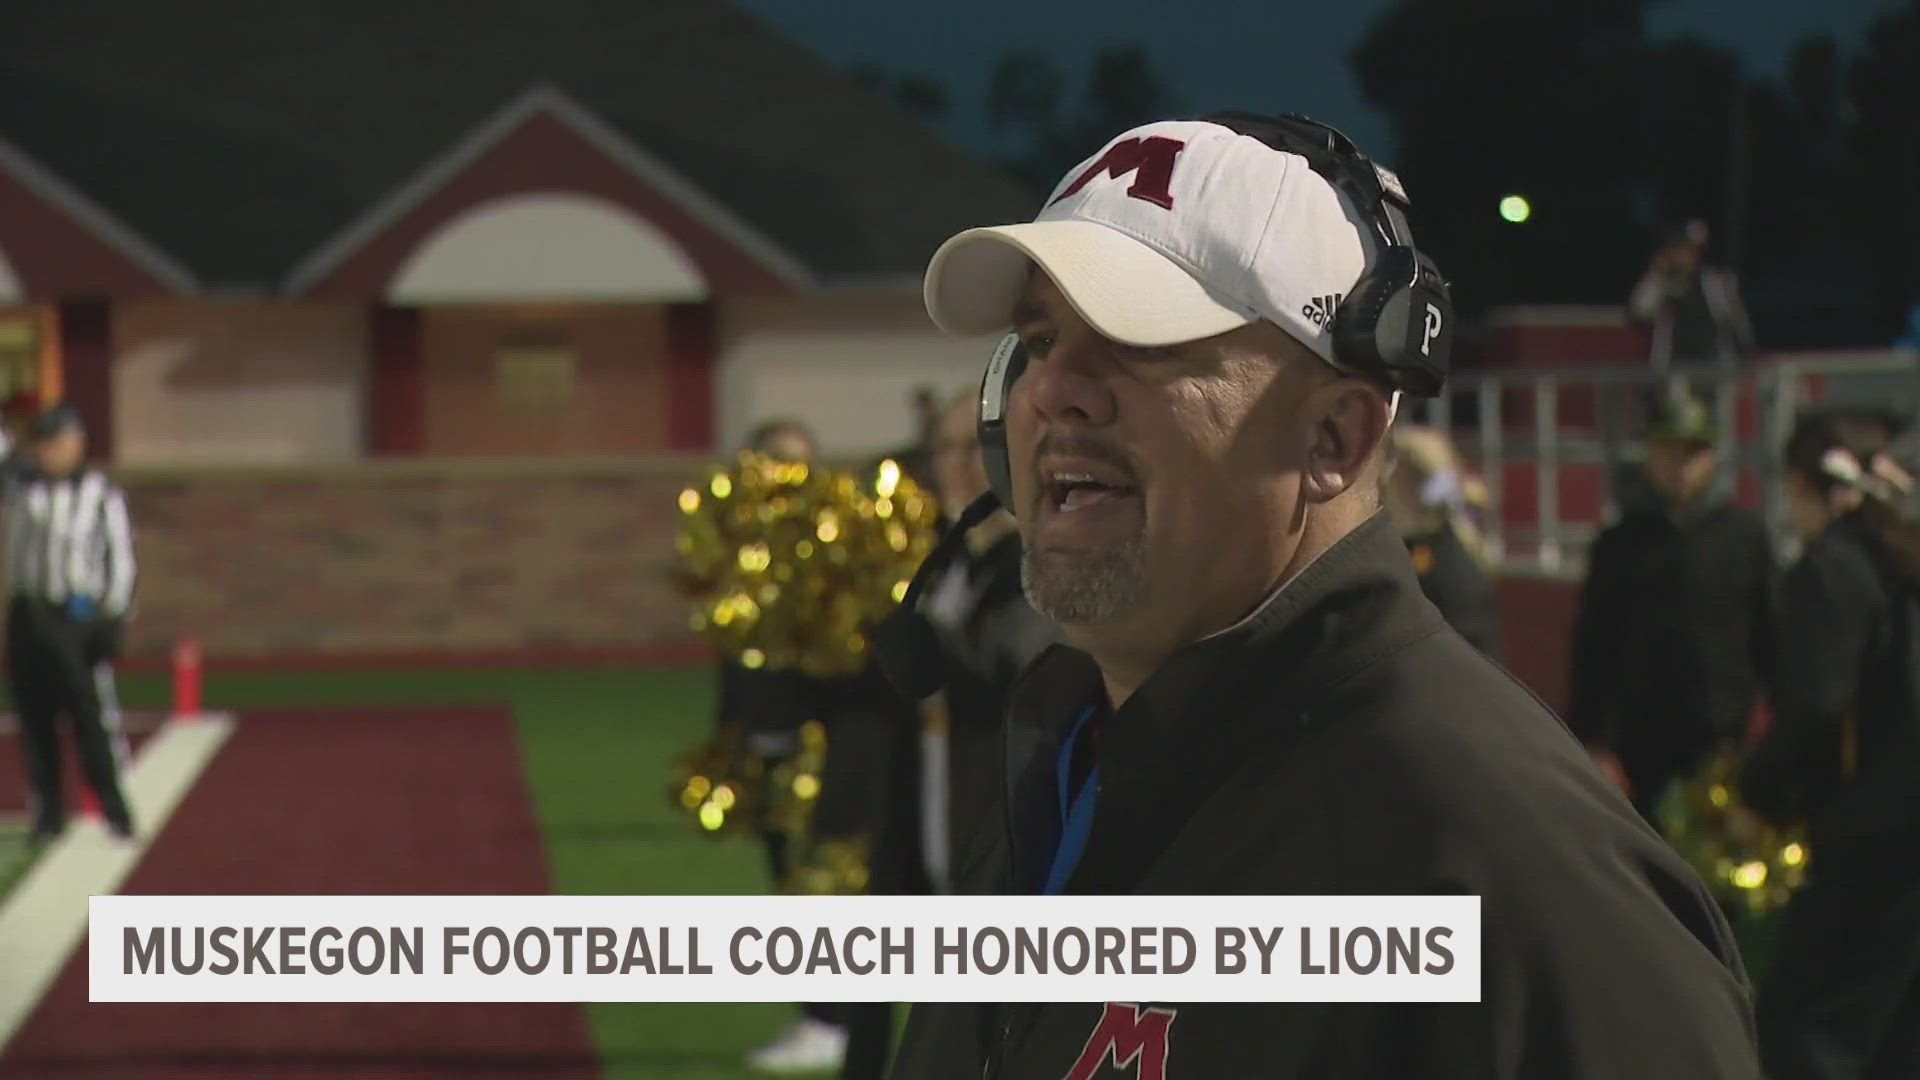 In 2012, Shane Fairfield was named a Detroit Lions High School Football Coach of the Week during the third week of this third season at Muskegon.